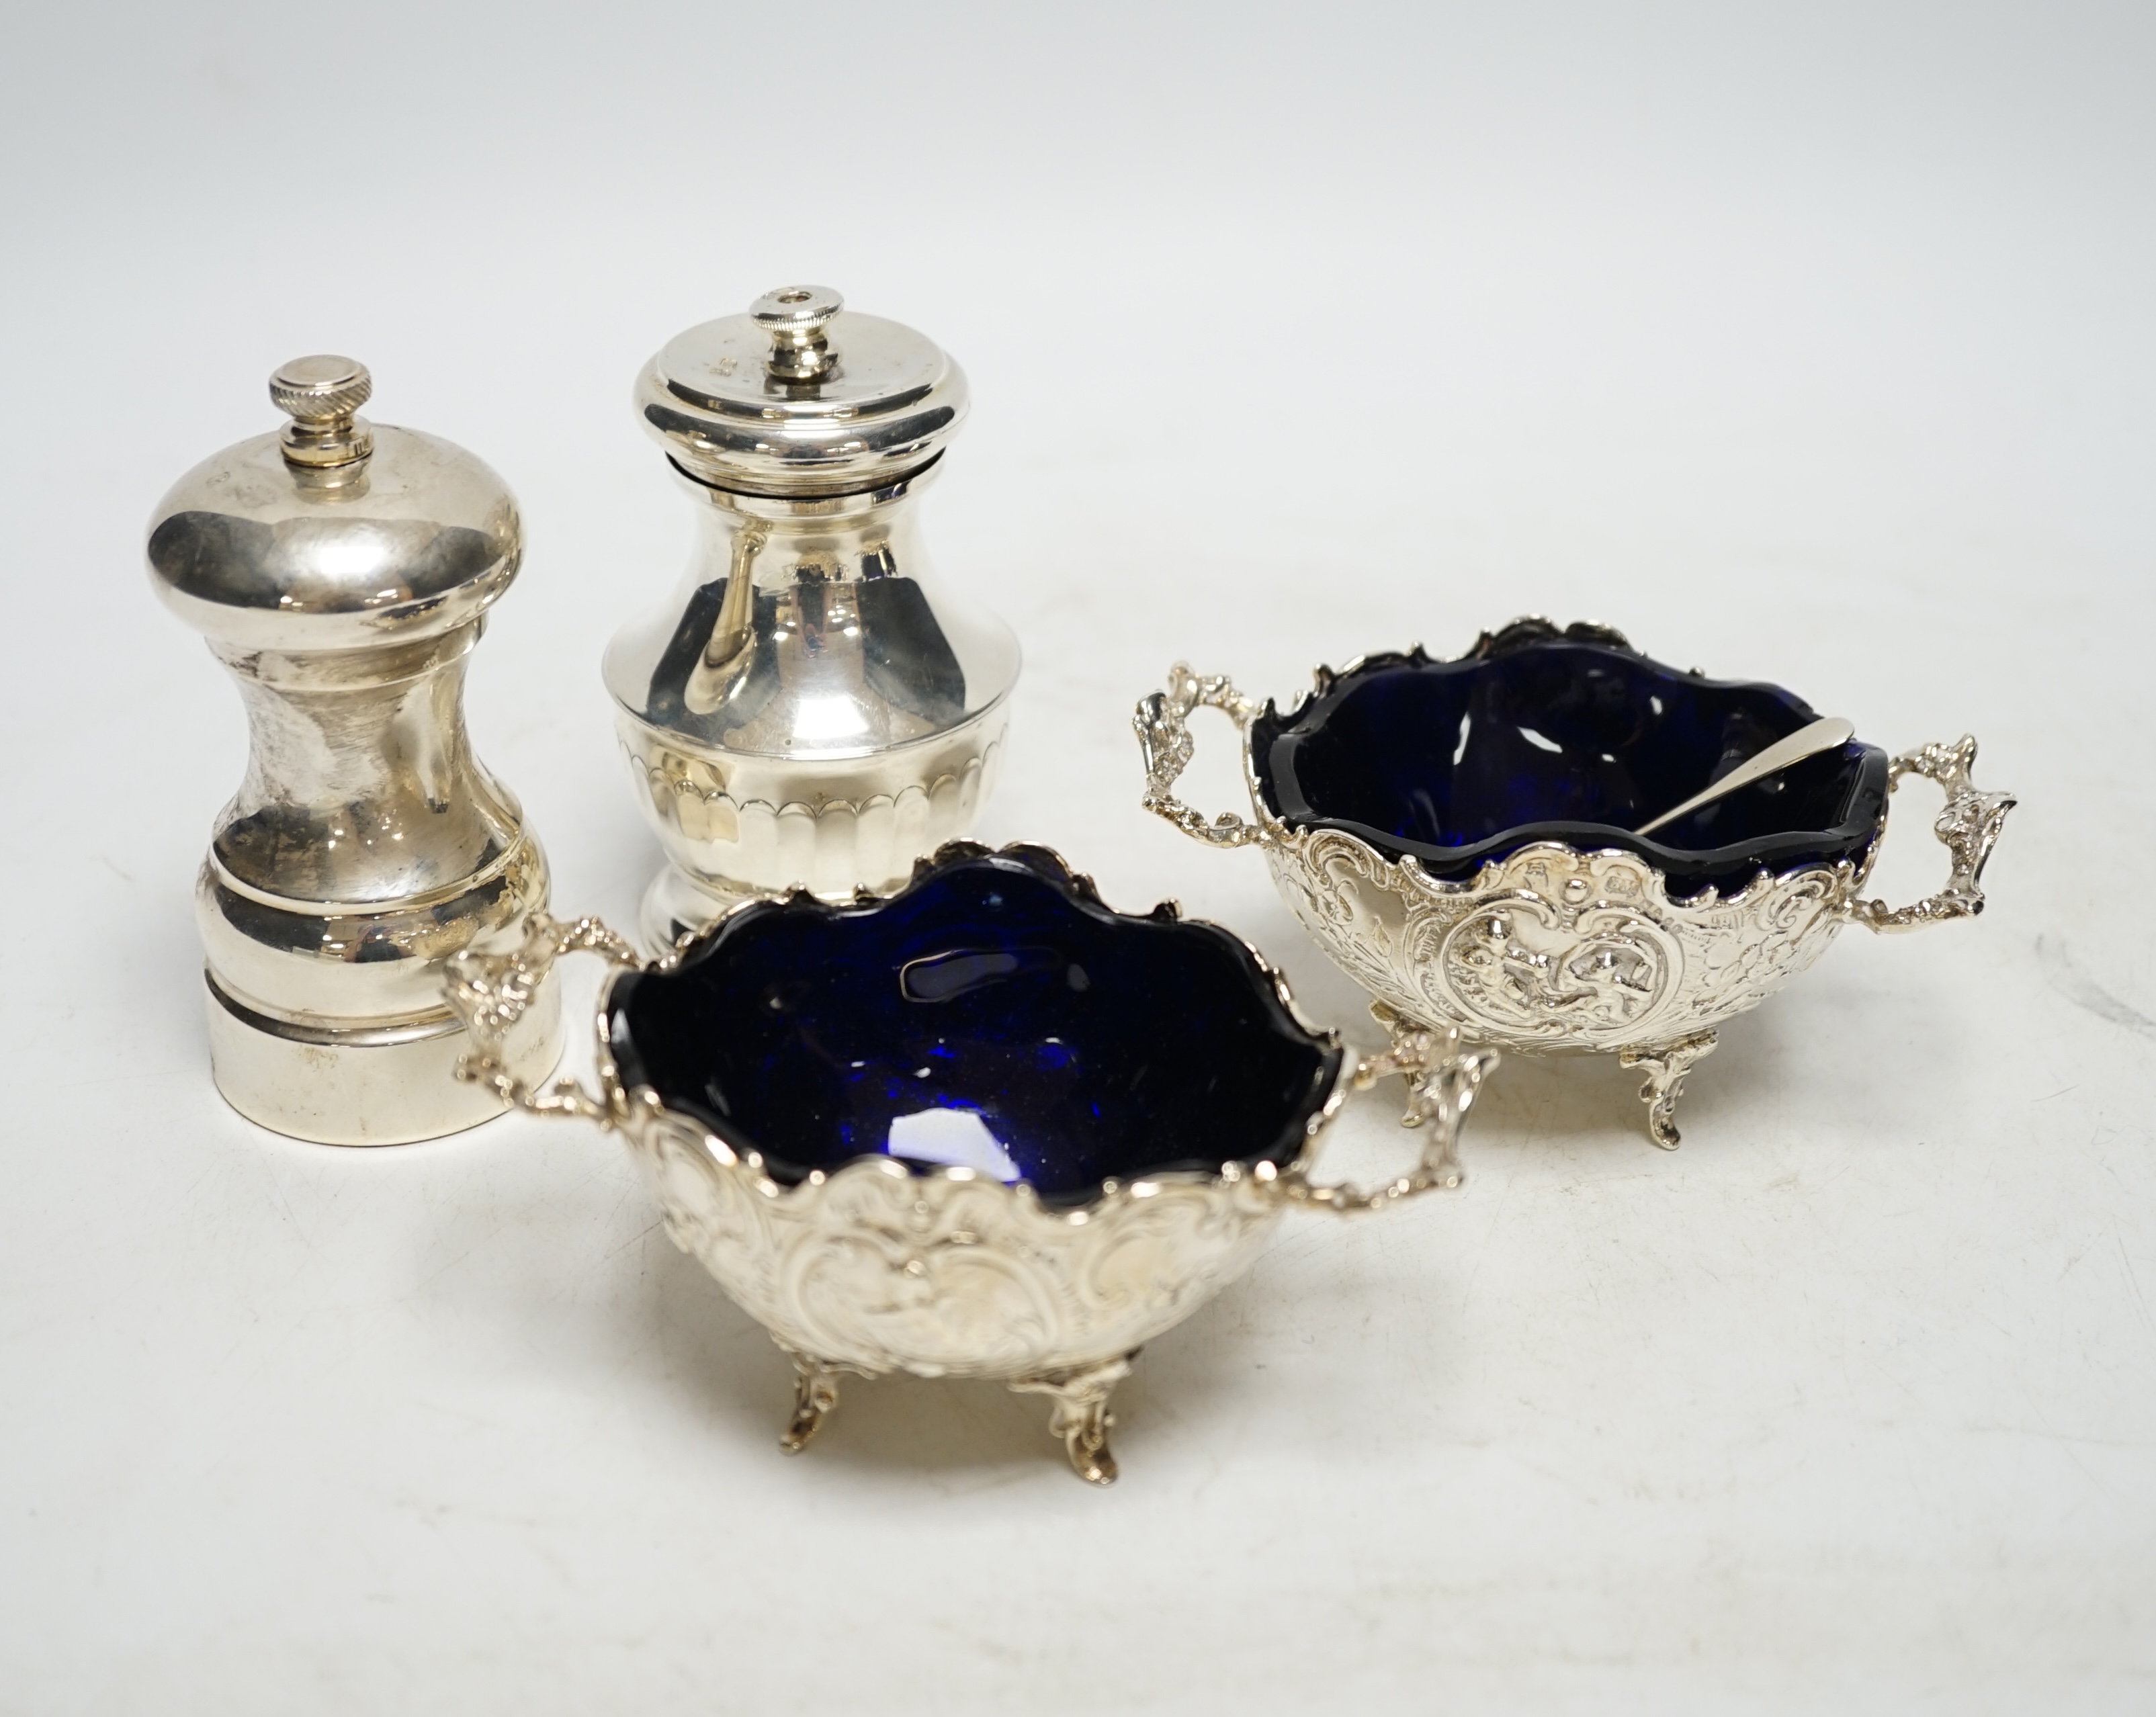 A pair of late 19th century Hanau silver two handled salts, with blue glass liners, import marks for Chester, 1899, with two associated spoons and two silver pepper mills. Condition - fair